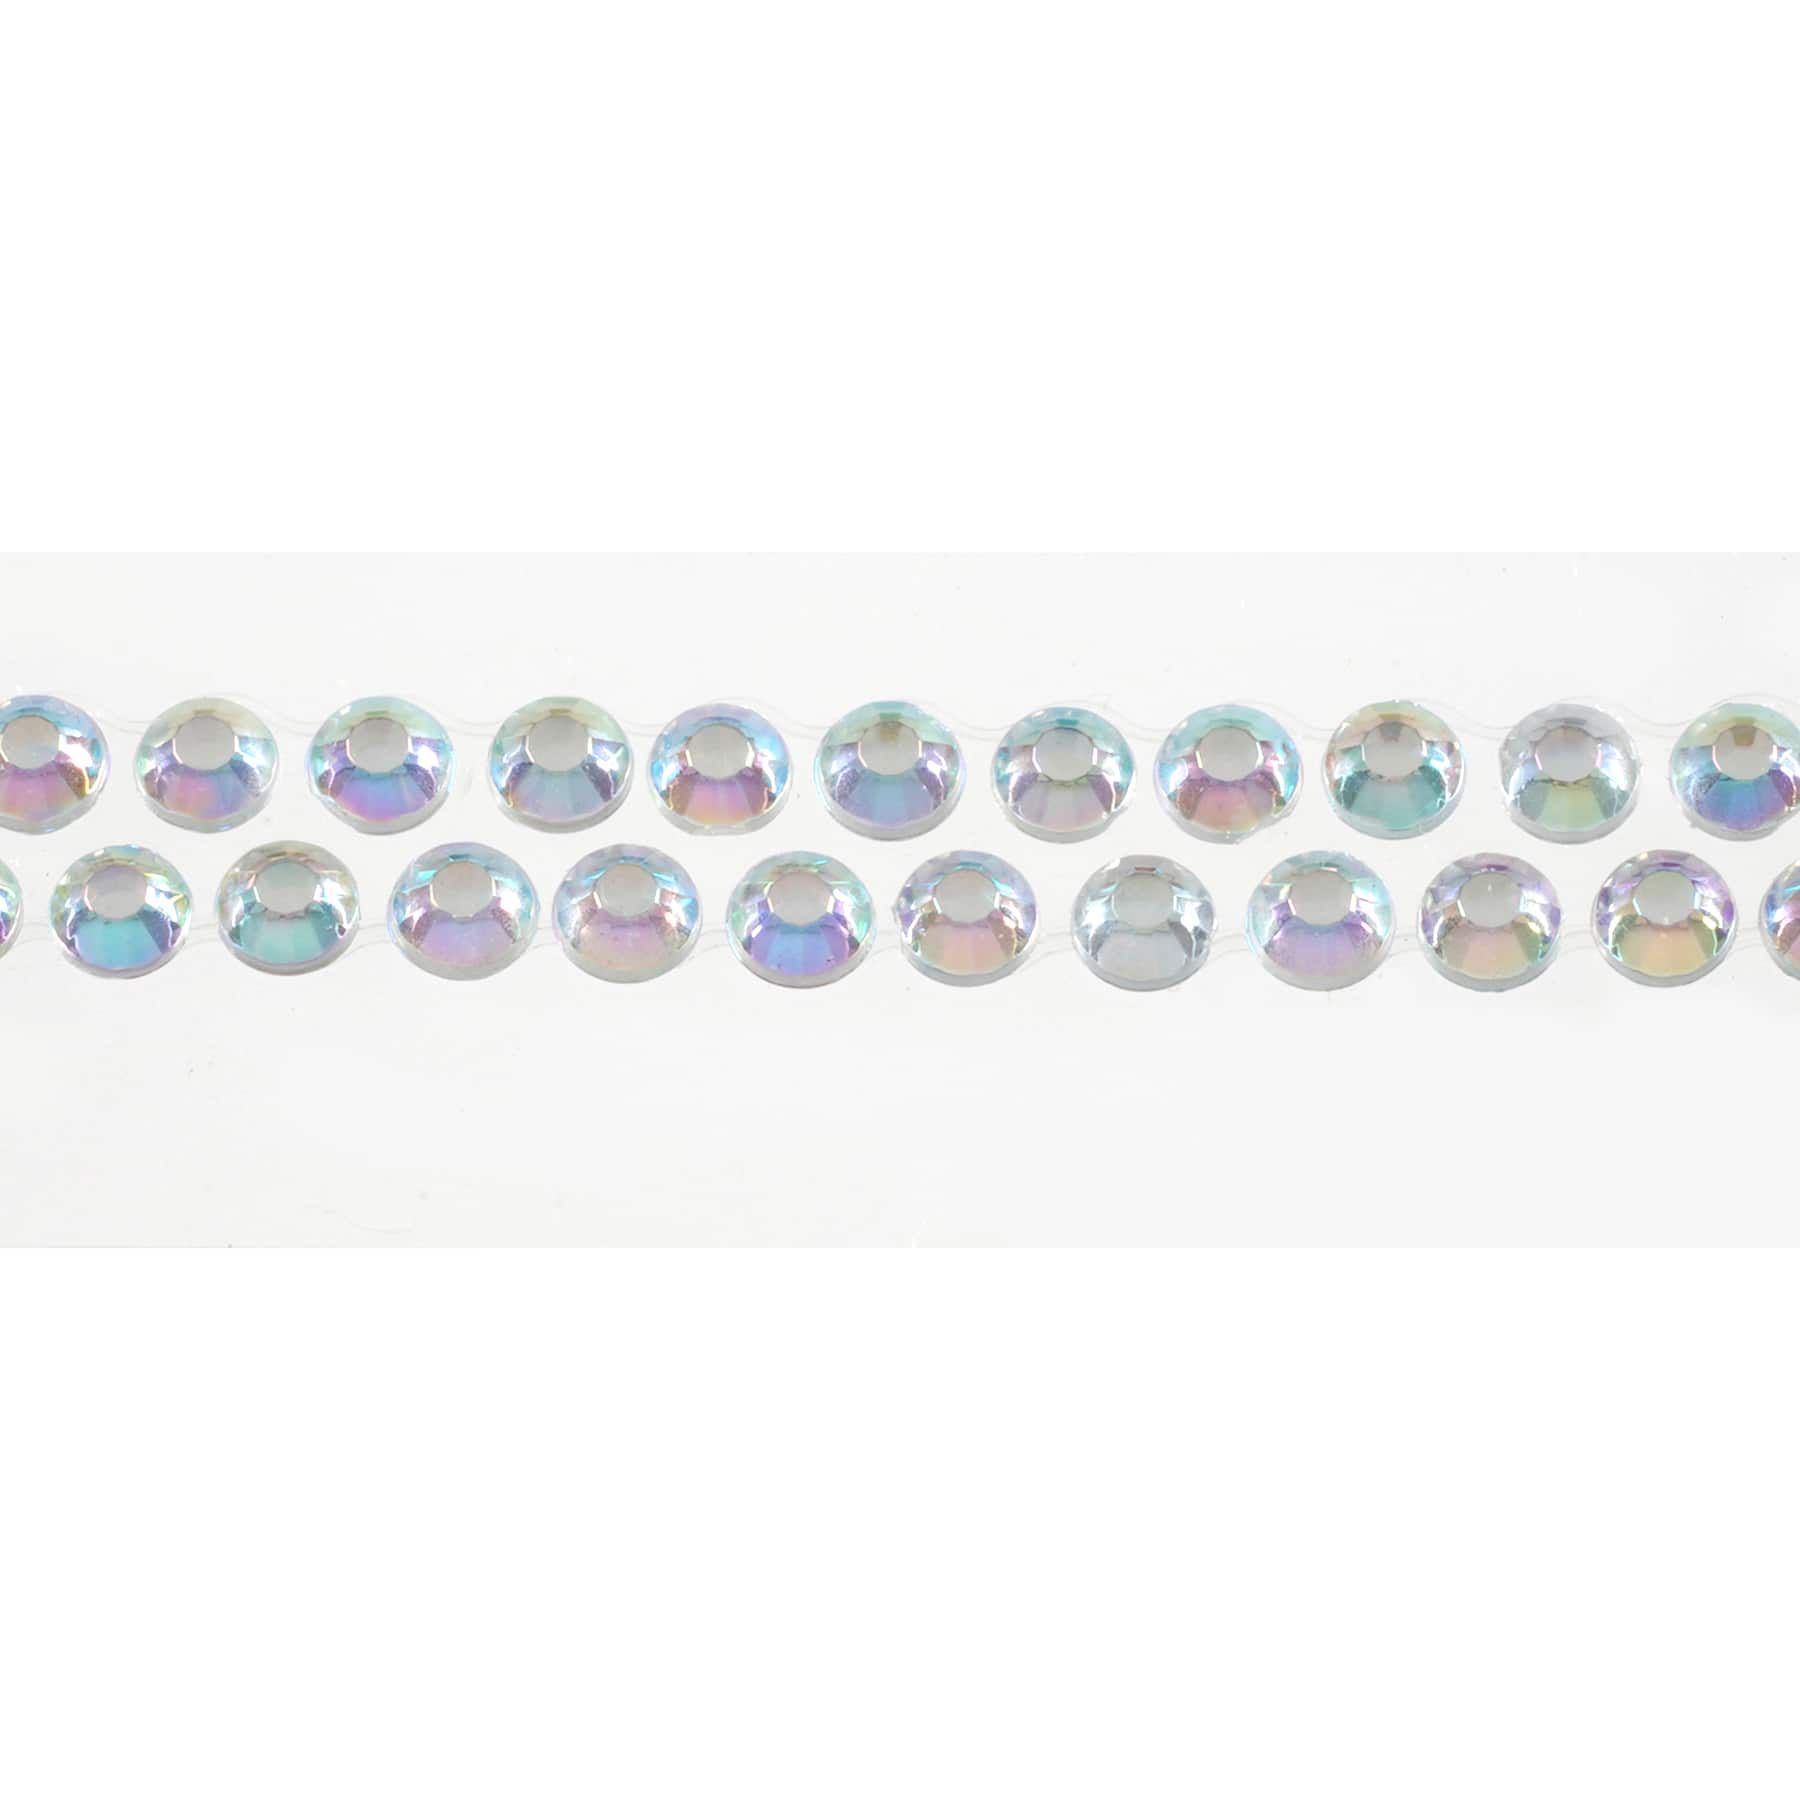 Recollections&#x2122; Bling on a Roll&#x2122; Iridescent Rhinestones, 3 mm